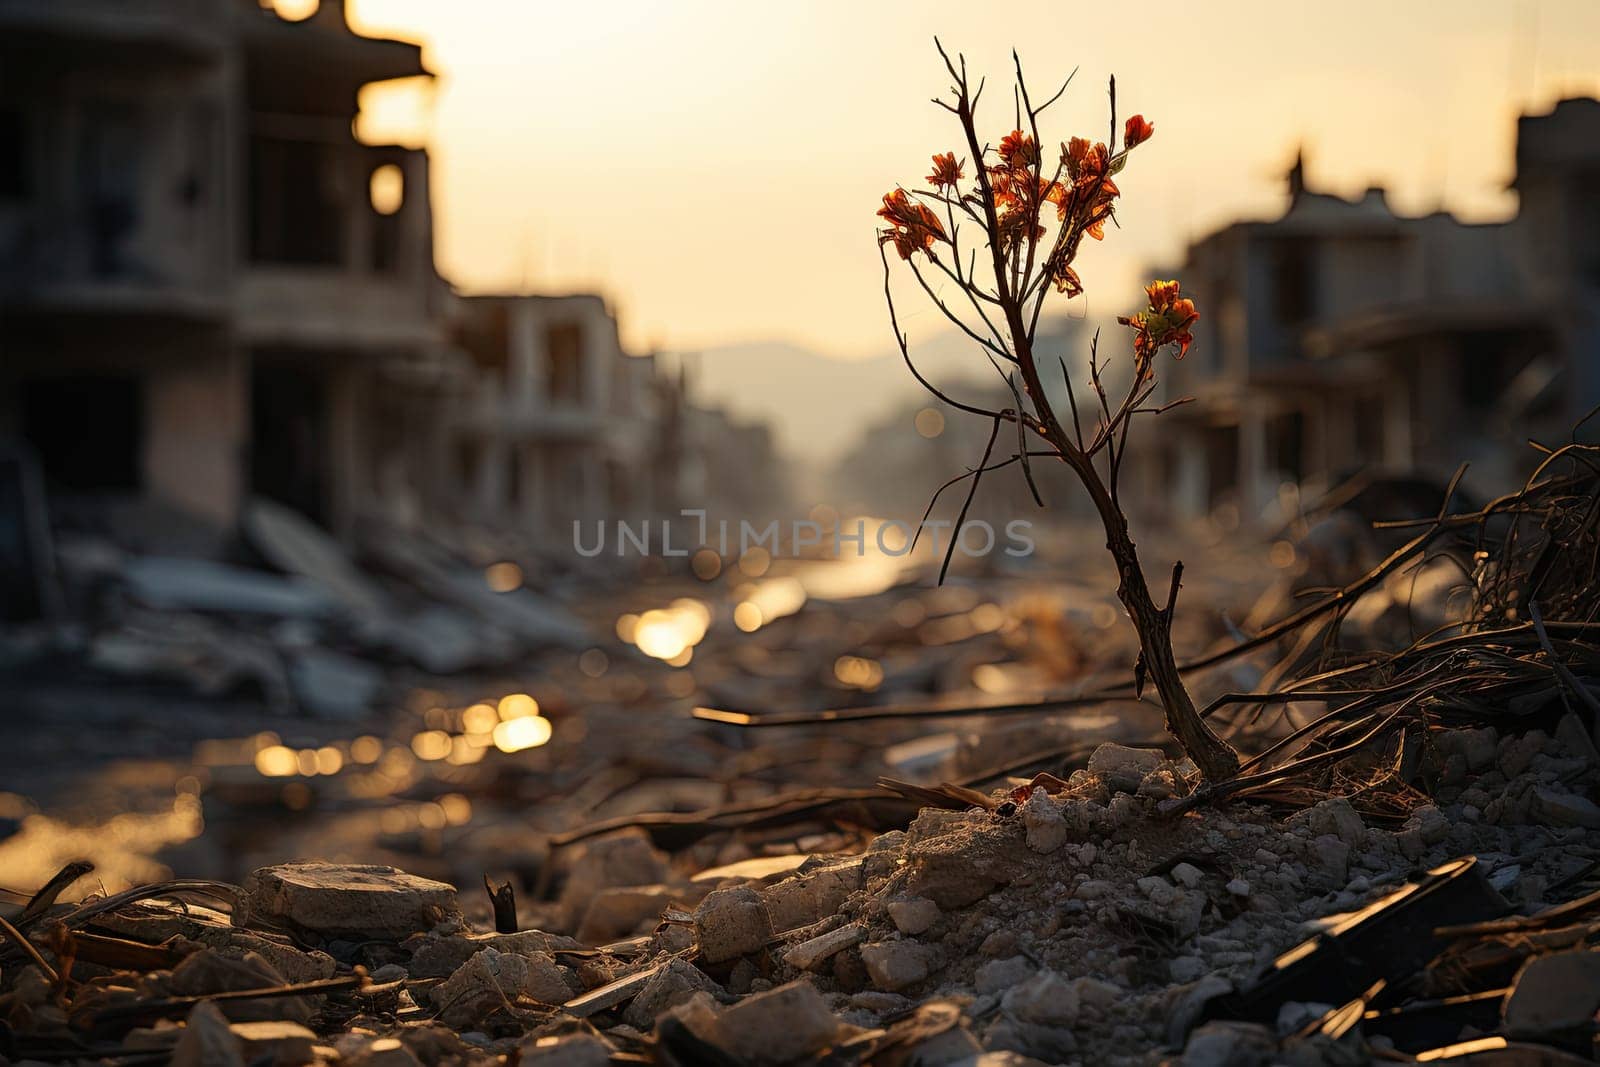 a flower in the middle of a rubble - strewn area with buildings in the background and sun shining through the sky